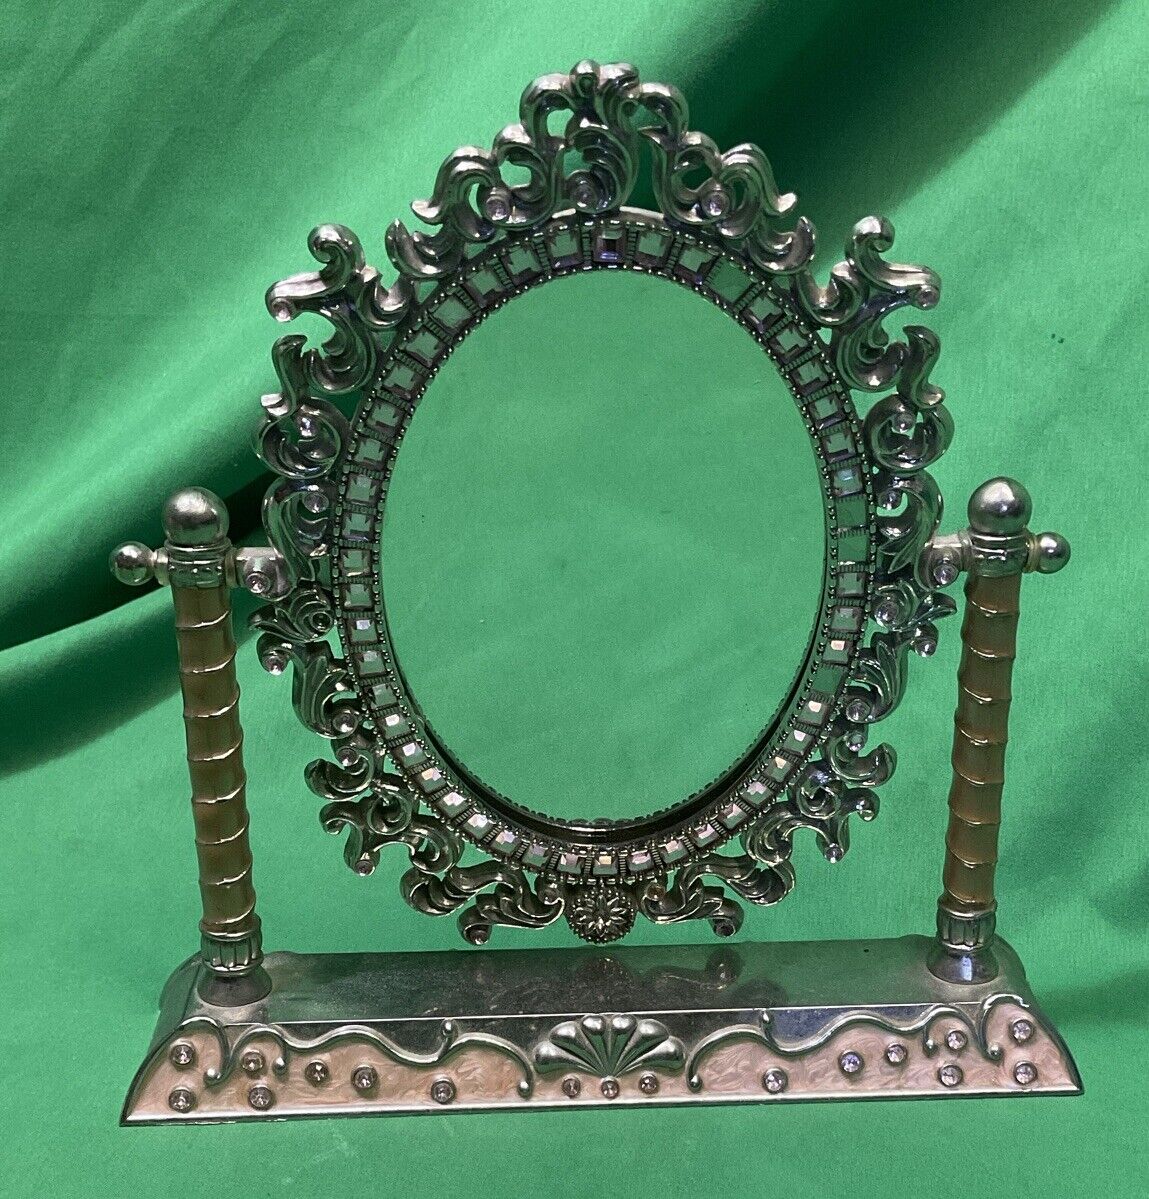 VTG Ornate Cast Iron Small Oval Tilt Mirror On Stand- 8.5” X 8.5”